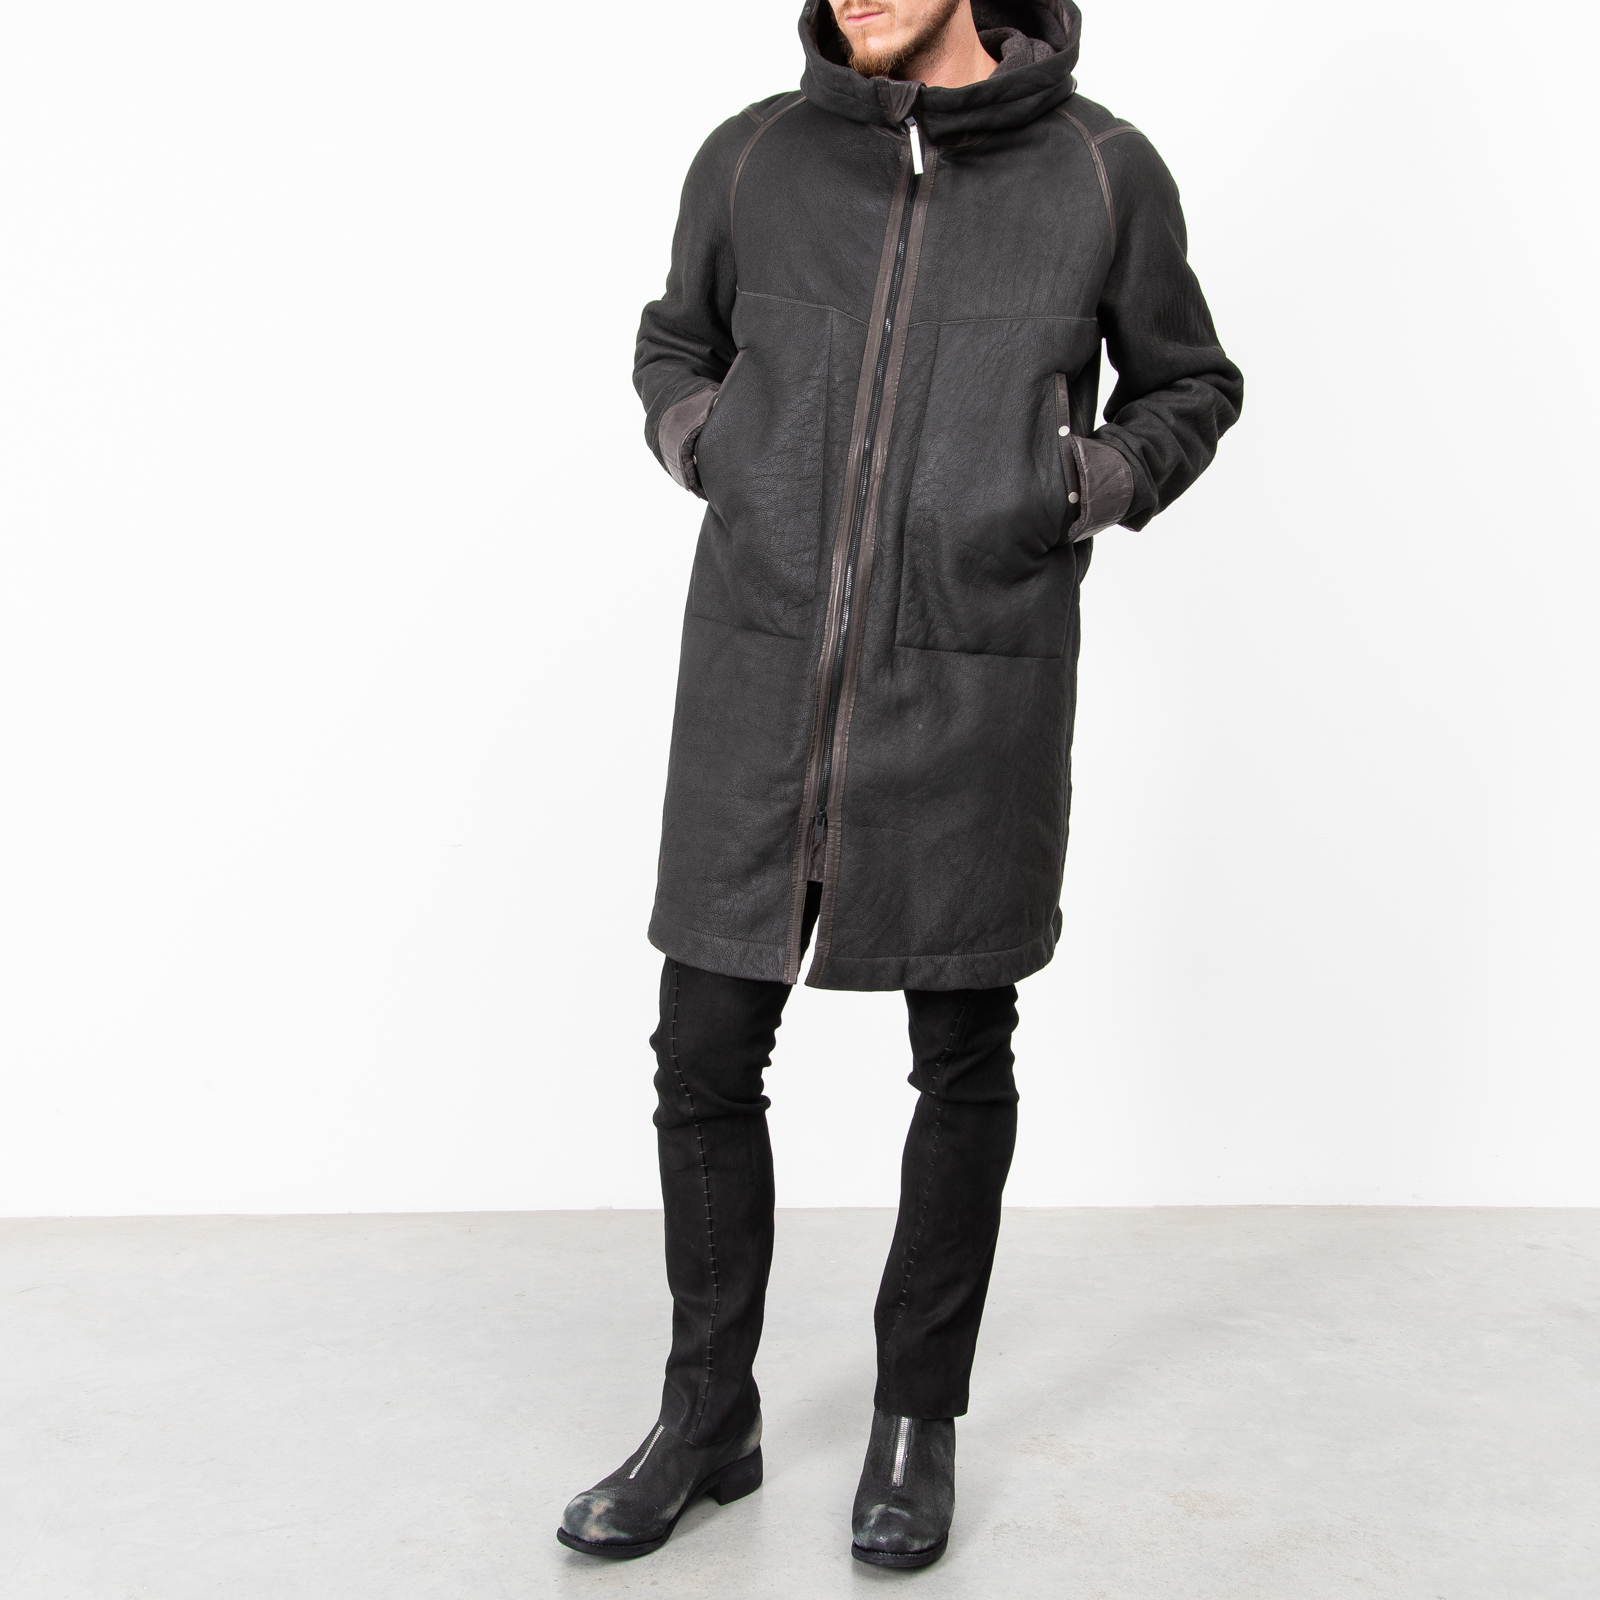 CHARCOAL HOODED SHEARLING COAT|wolfensson